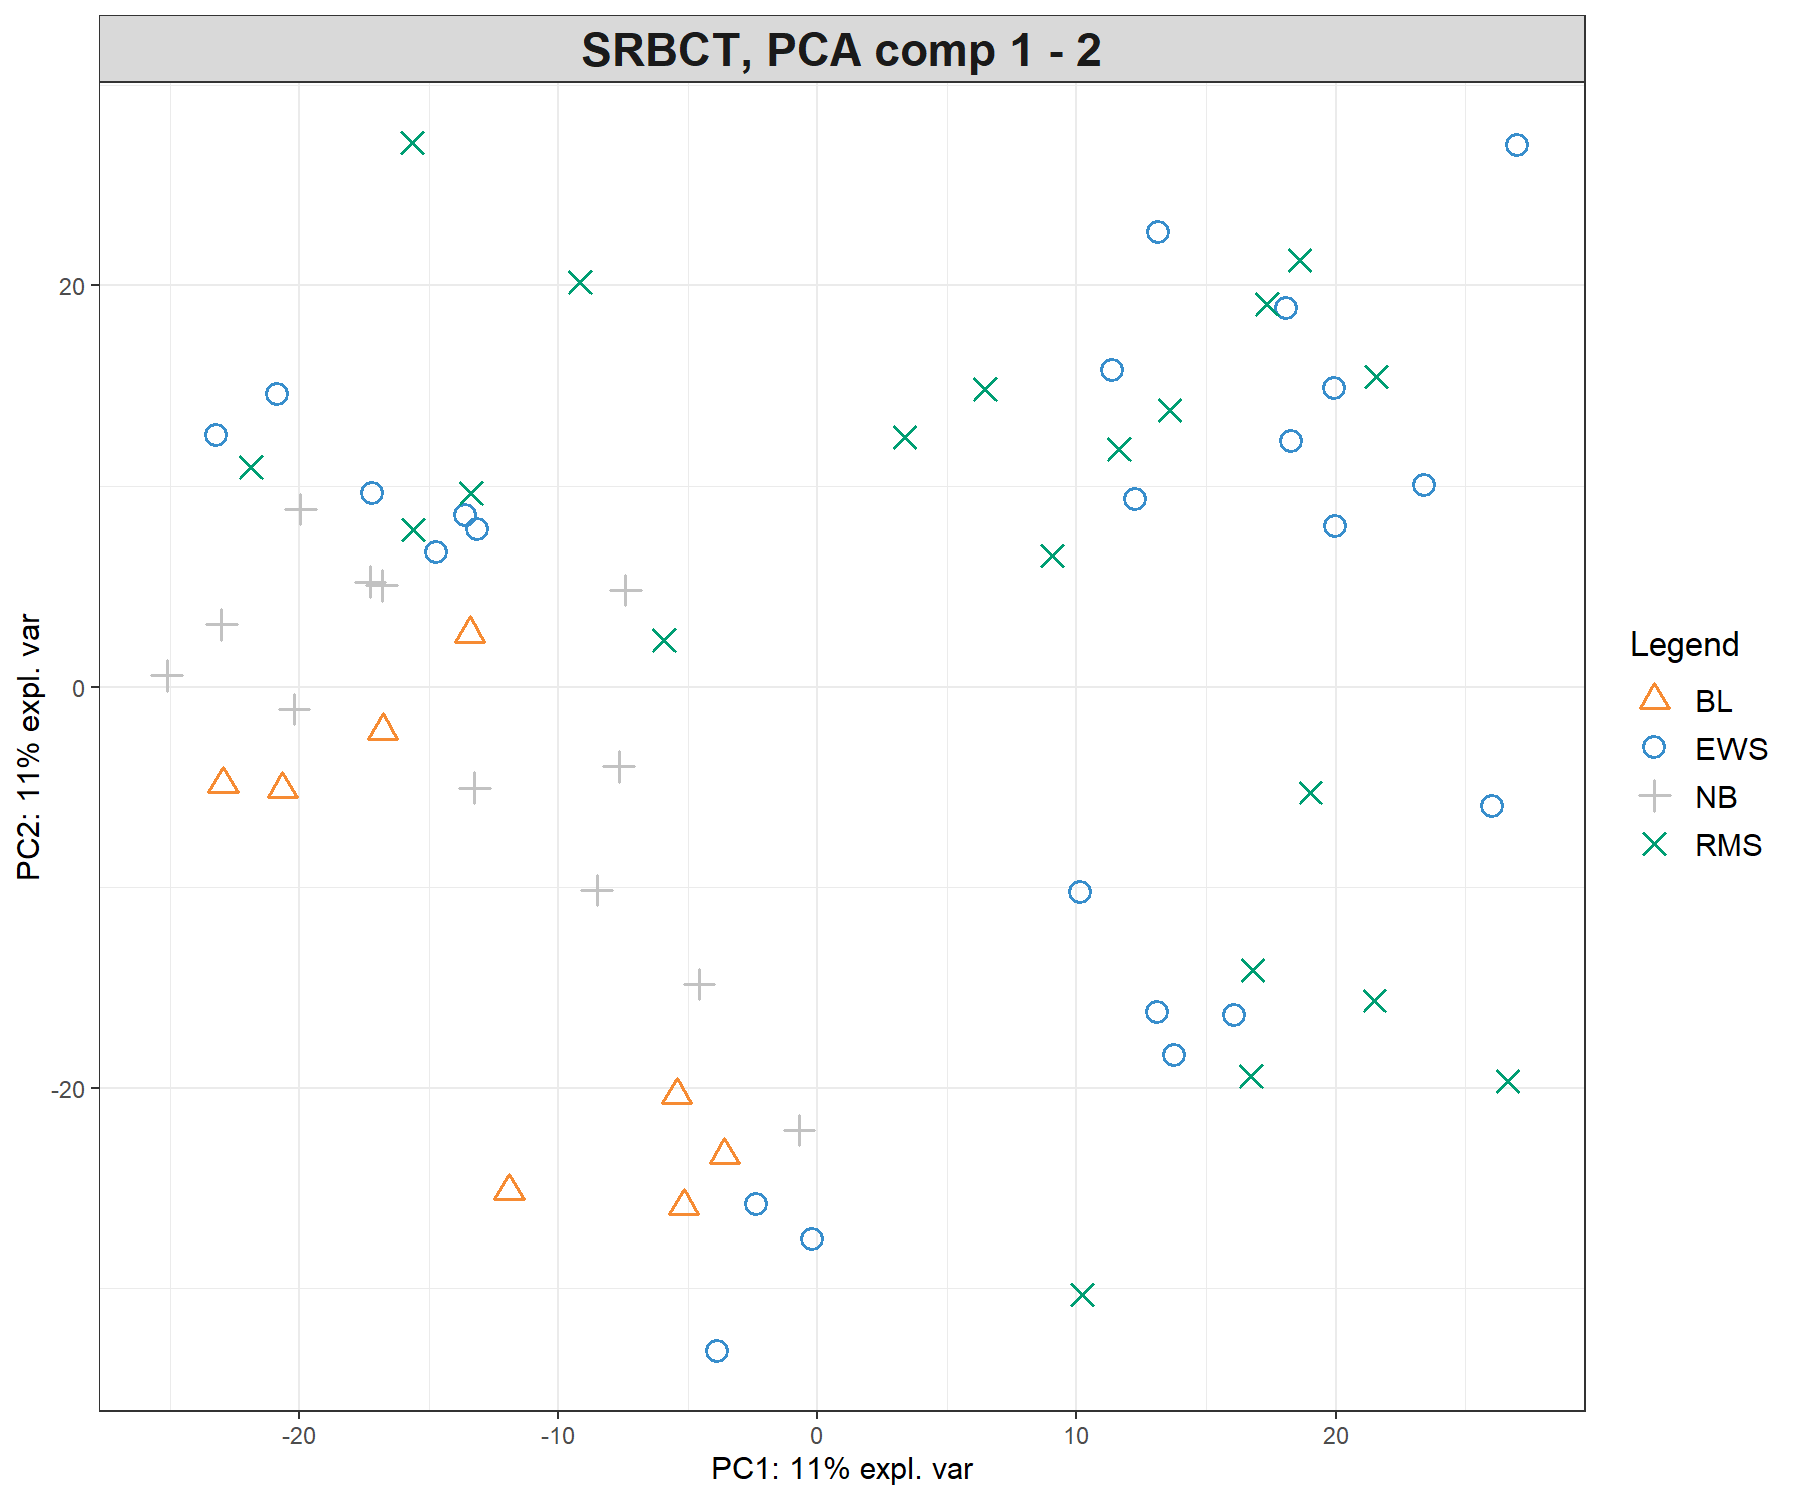 Preliminary (unsupervised) analysis with PCA on the SRBCT gene expression data. Samples are projected into the space spanned by the principal components 1 and 2. The tumour types are not clustered, meaning that the major source of variation cannot be explained by tumour types. Instead, samples seem to cluster according to an unknown source of variation.